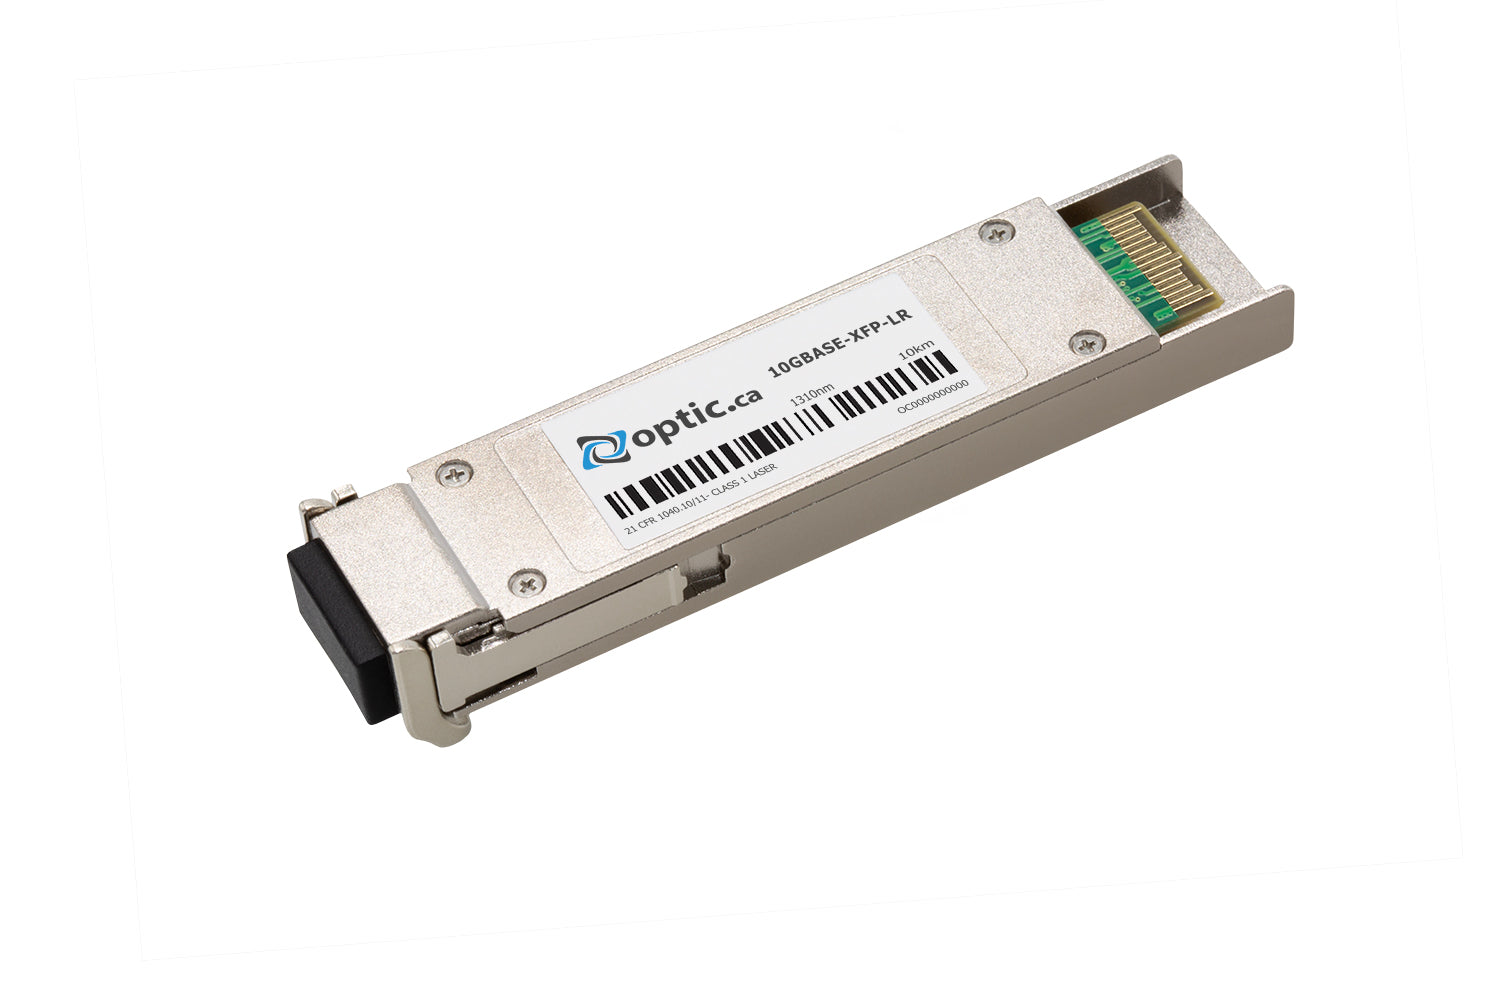 OPTIC.CA - 10GBASE-LR XFP - FTLX1411D3-OC - FINISAR COMPATIBLE